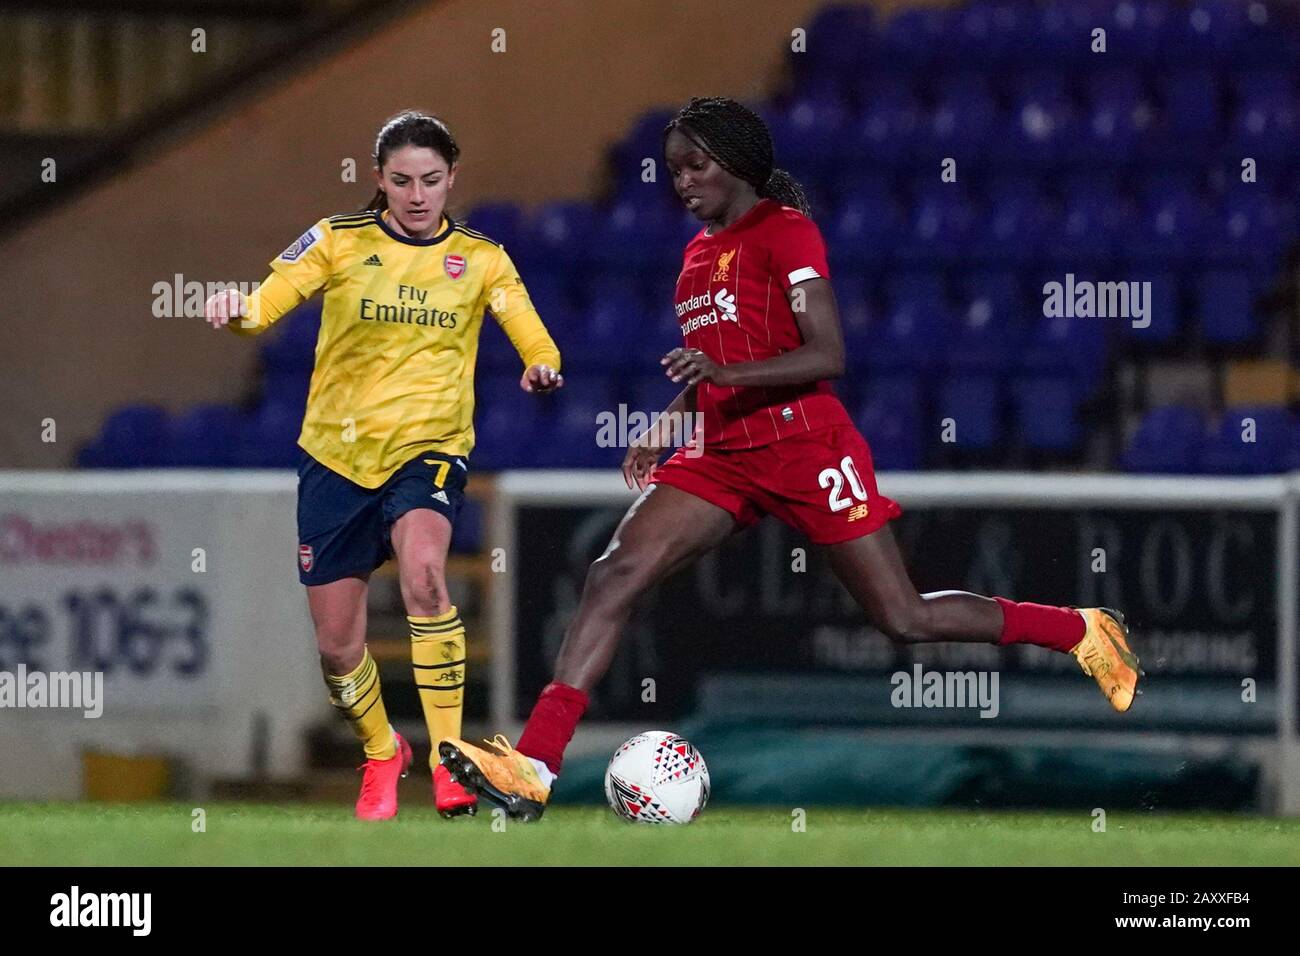 CHESTER. ENGLAND. FEB 13th: Rinsola Babajide (right) against Danielle Van de Donk of Arsenal during the Women’s Super League game between Liverpool Women and Arsenal Women at The Deva Stadium in Chester, England. (Photo by Daniela Porcelli/SPP) Stock Photo